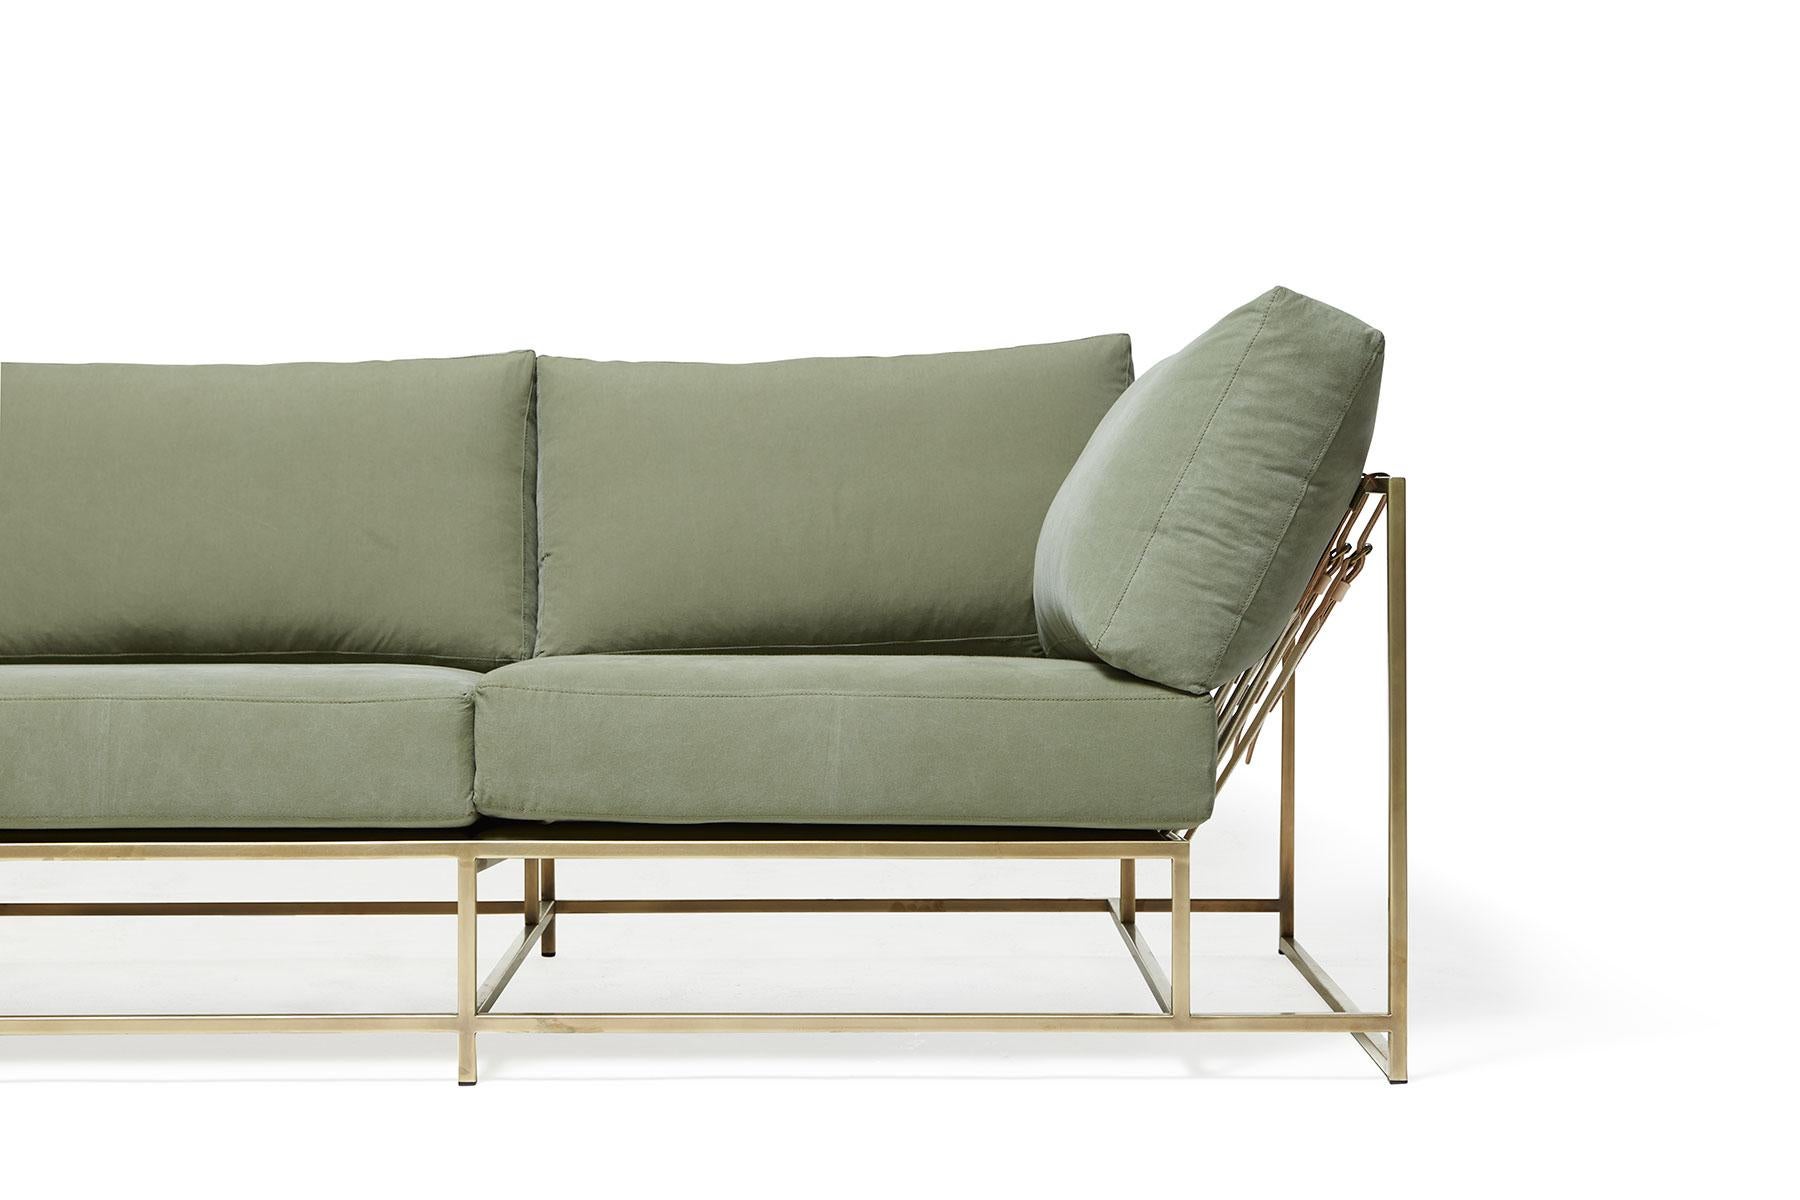 American Olive Canvas & Tarnished Brass Sofa For Sale